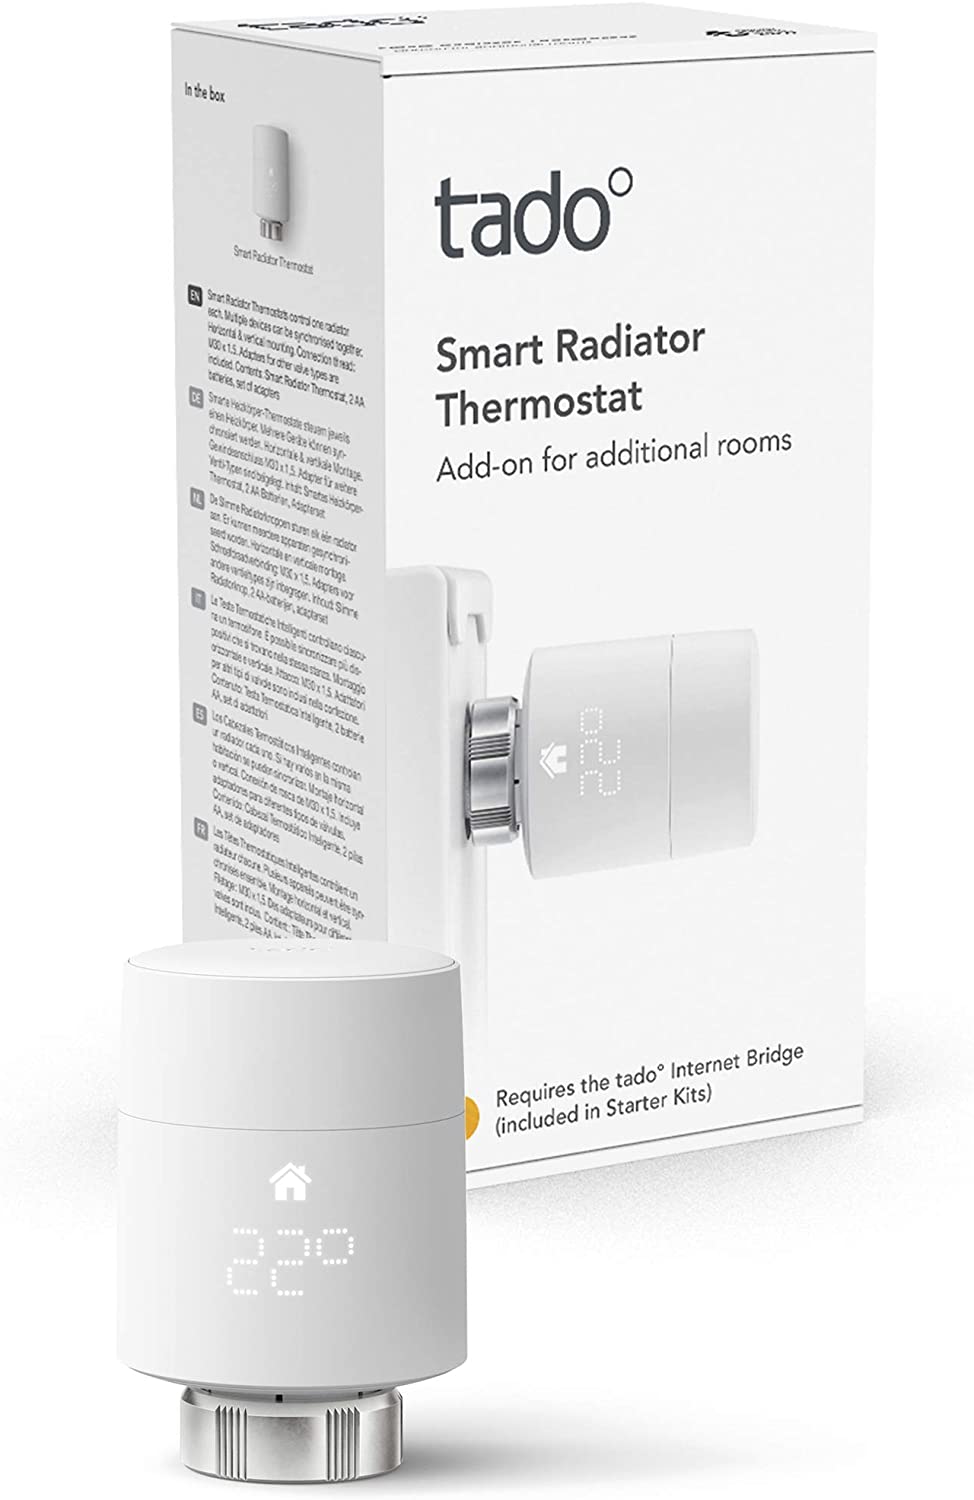 a tado smart radiator thermostatic valve with its packaging